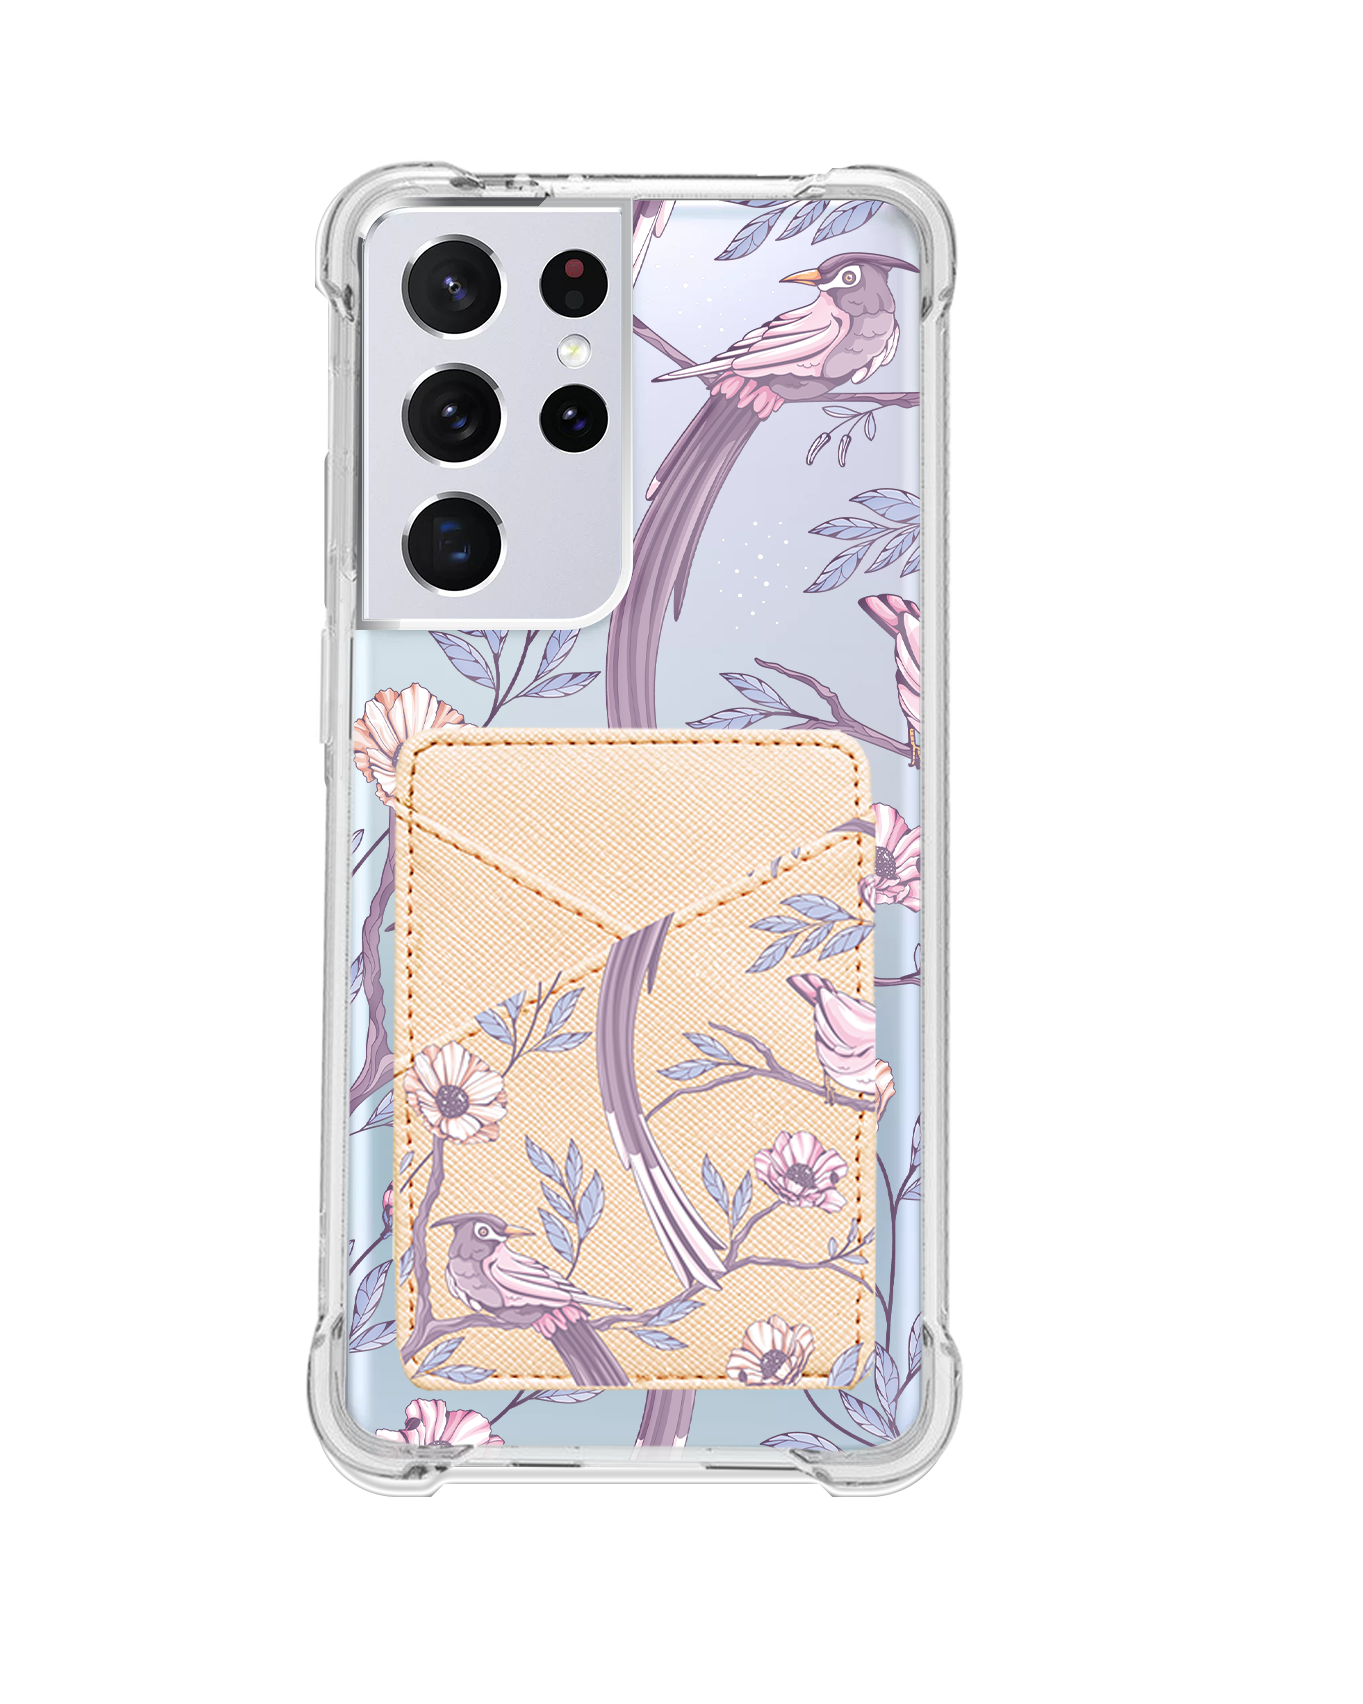 Android Phone Wallet Case - Lovebird 4.0